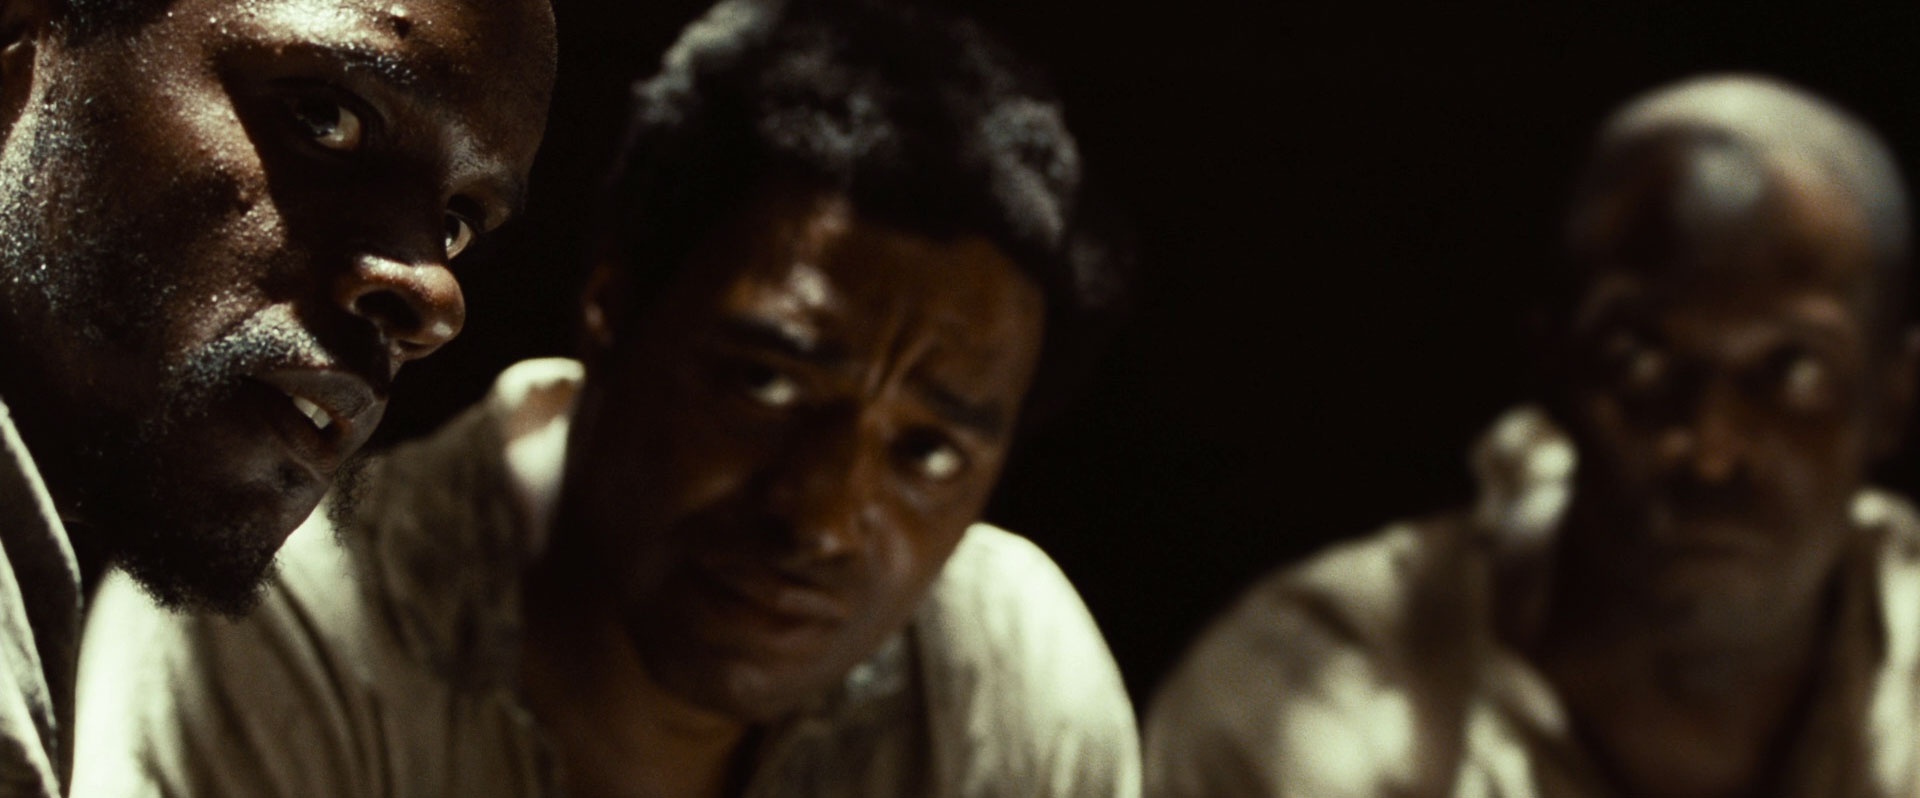 Galerie 12 Years a Slave 5